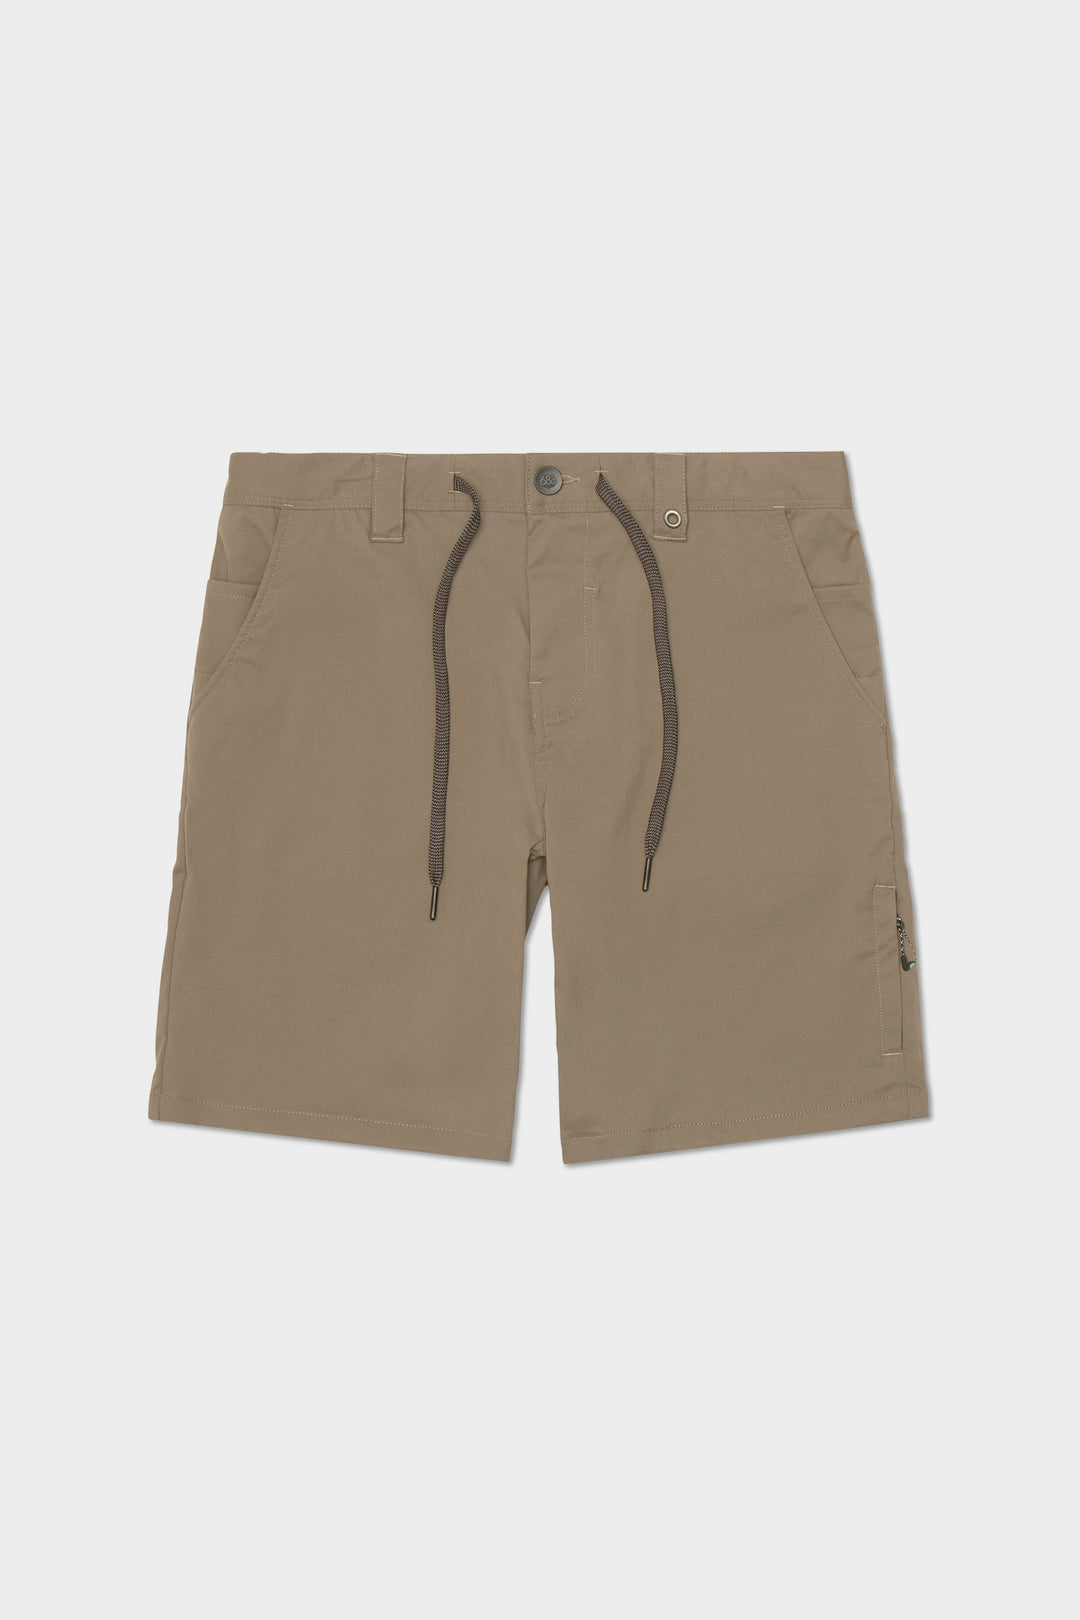 686 Everywhere Hybrid Short Relaxed Fit - Tobacco